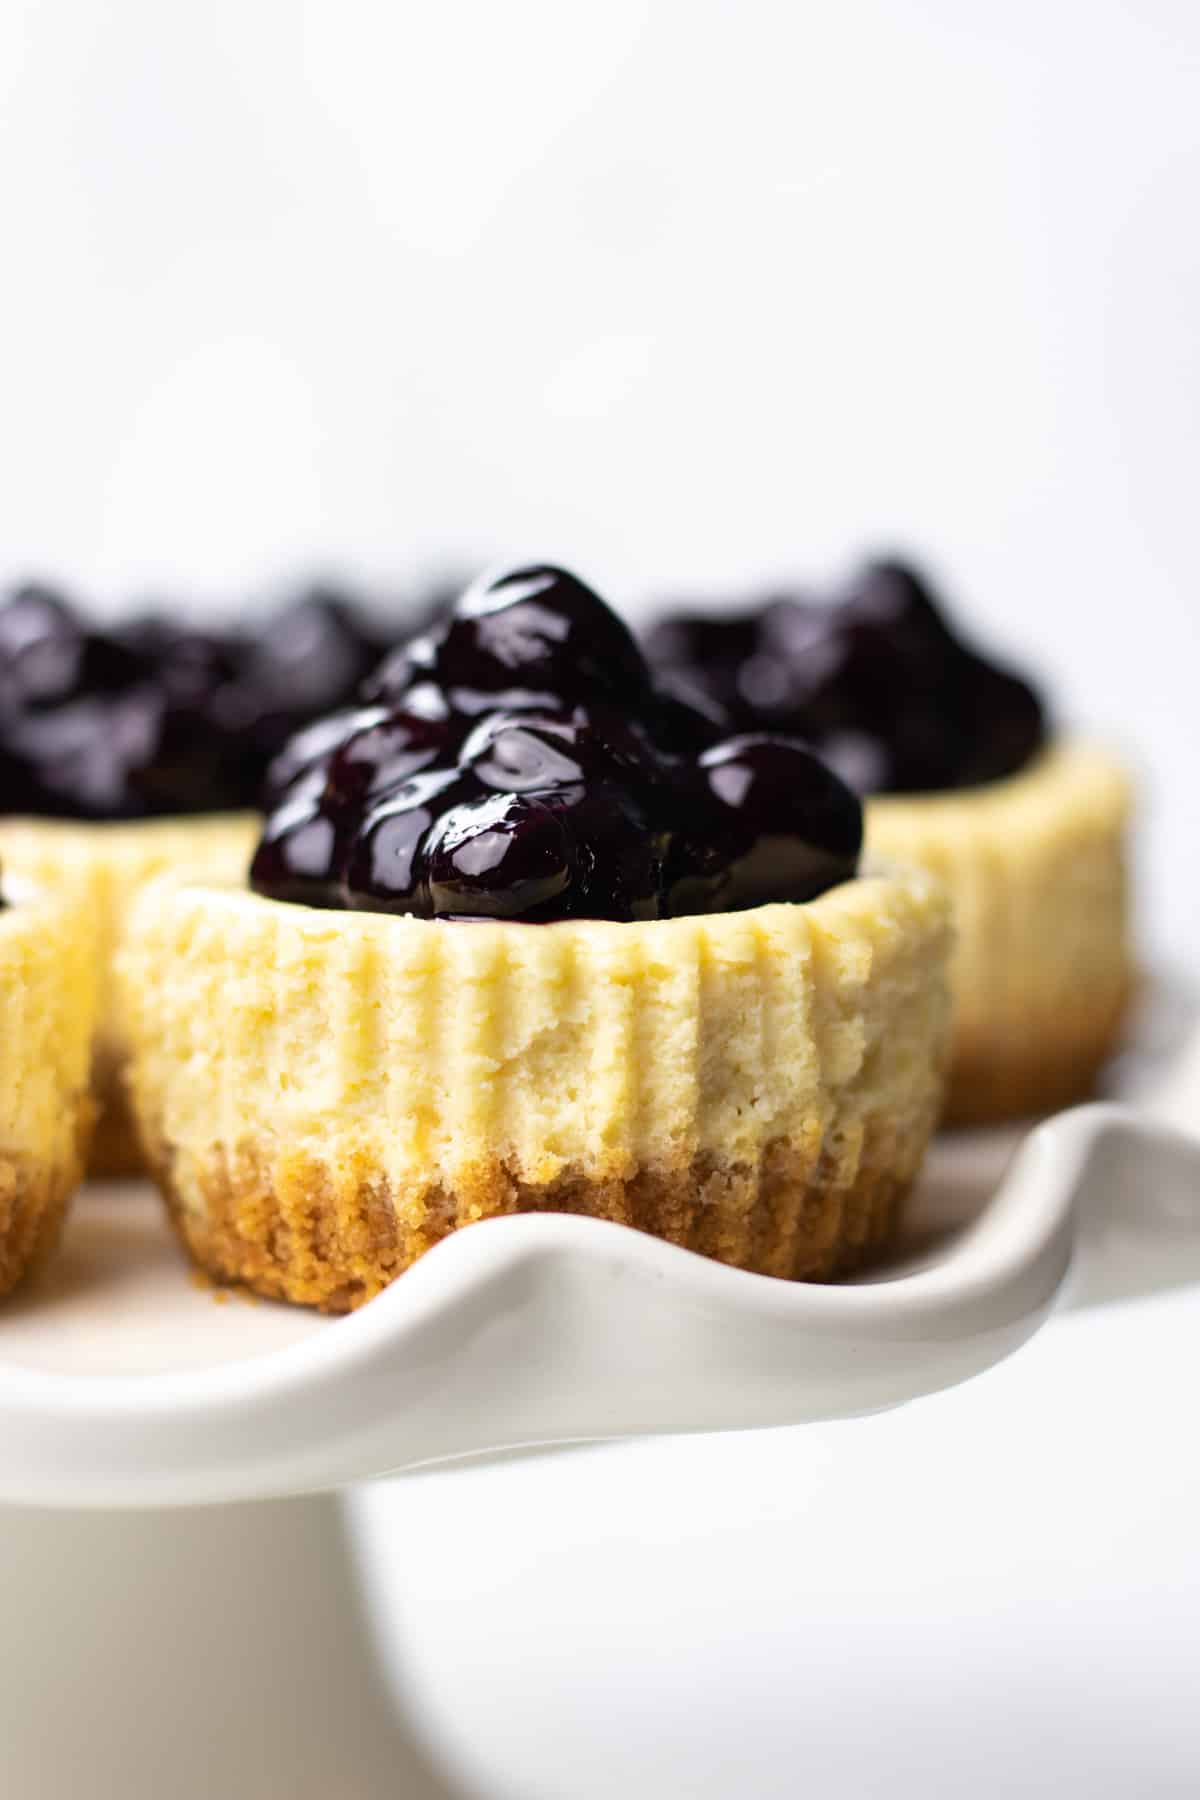 Mini cheesecakes, topped with blueberry sauce, on a cake stand.